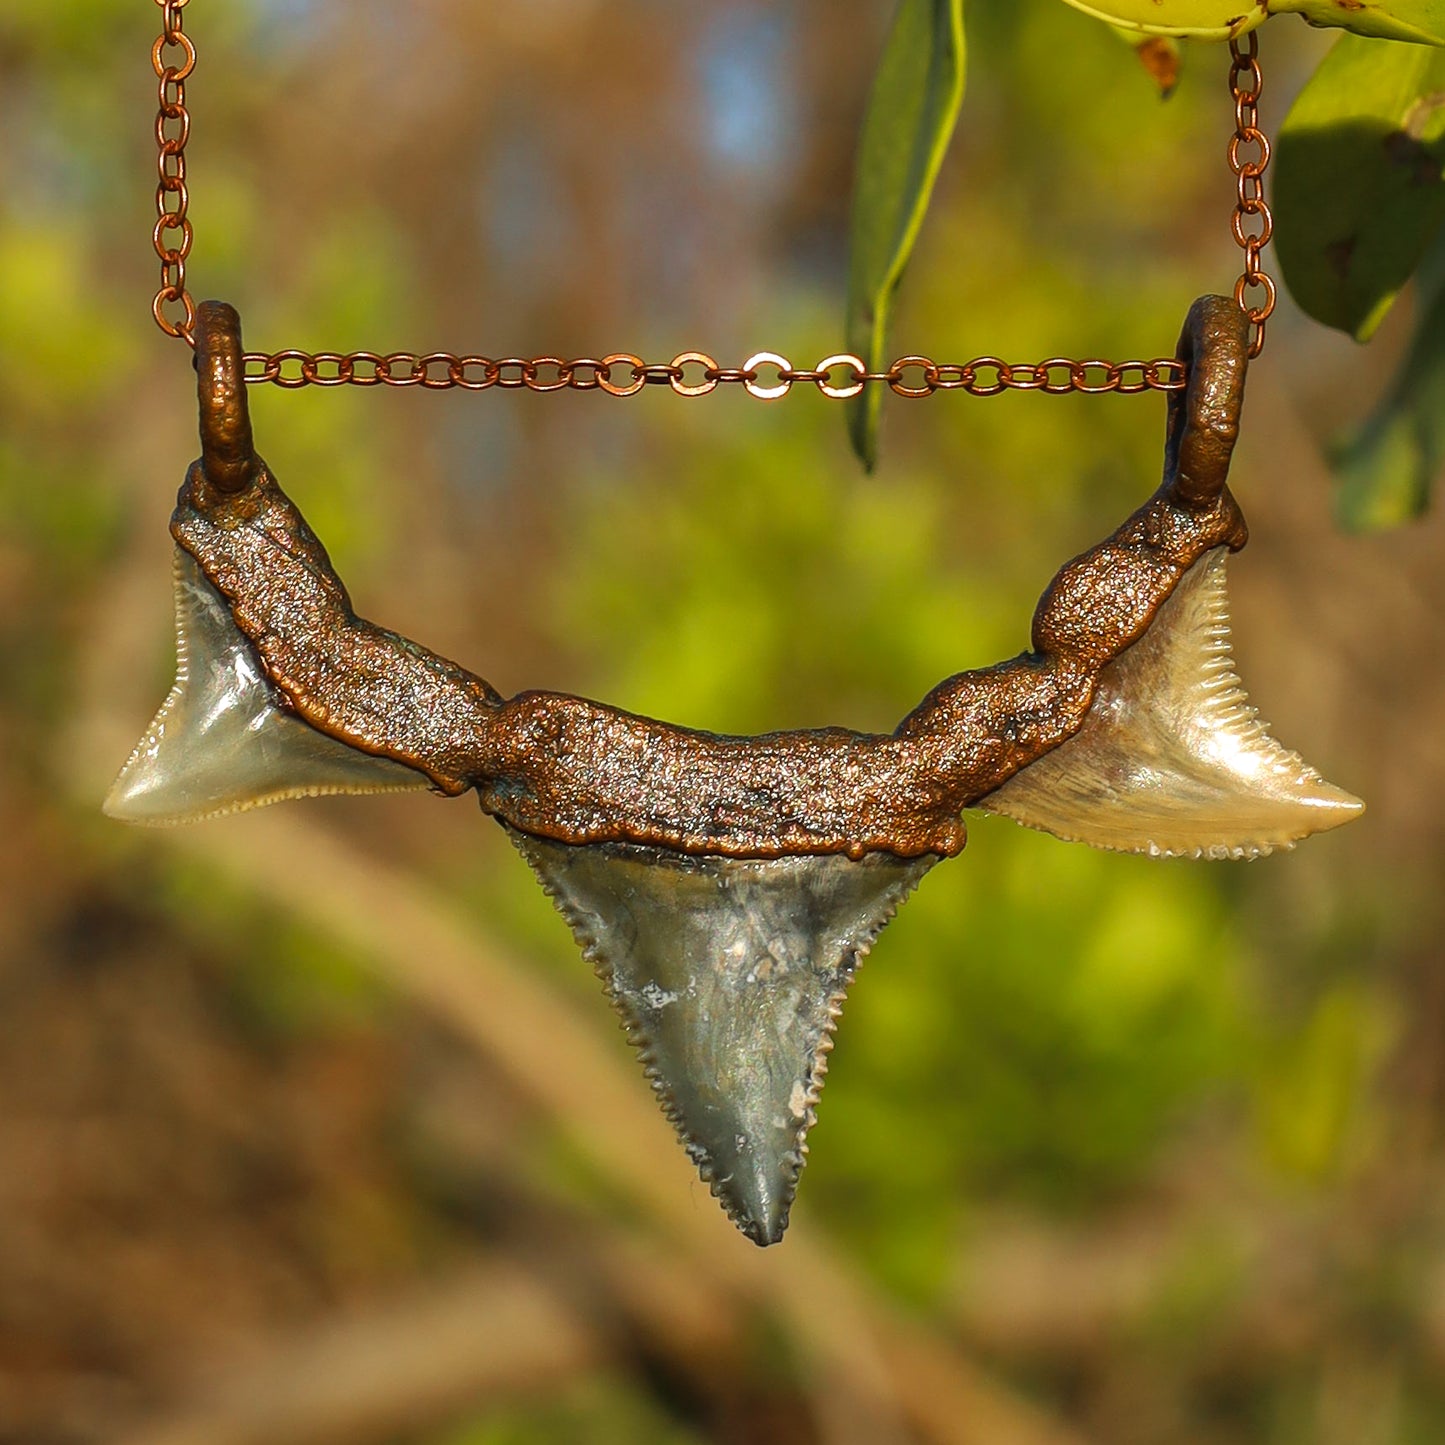 Great White, Hemi/Snaggletooth, Bull Florida Fossil Shark  Tooth Copper Pendant Chain Necklace